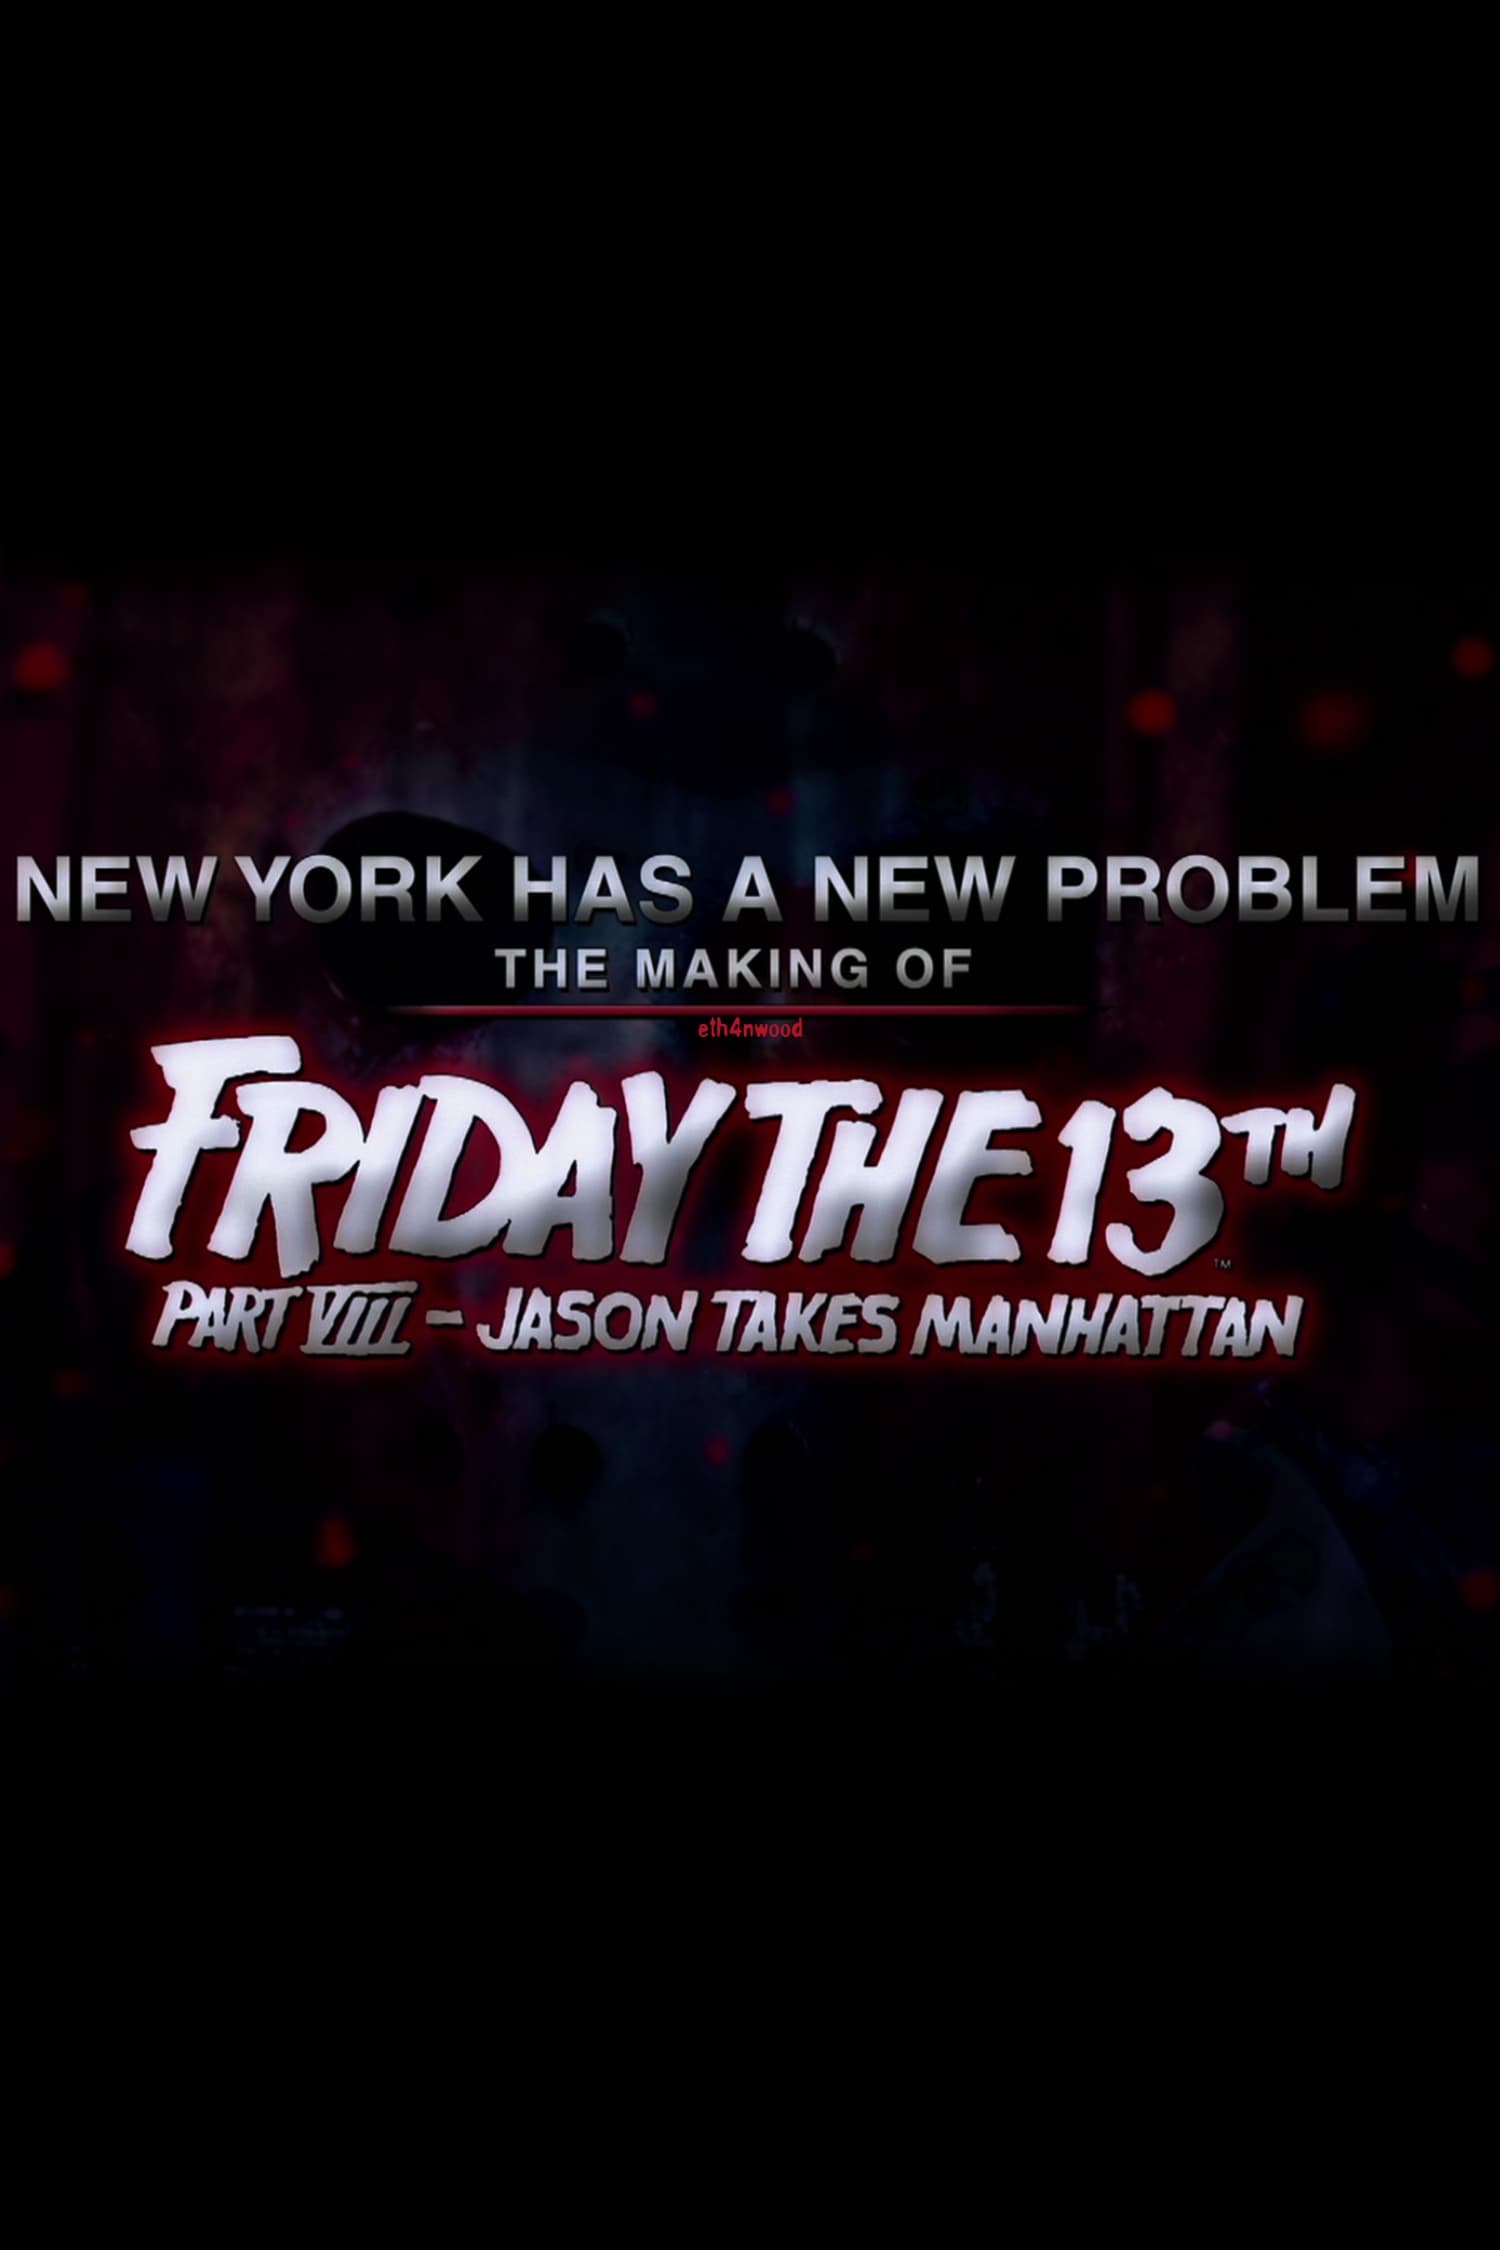 New York Has a New Problem The Making of Friday the 13th, Part VIII - Jason Takes Manhattan